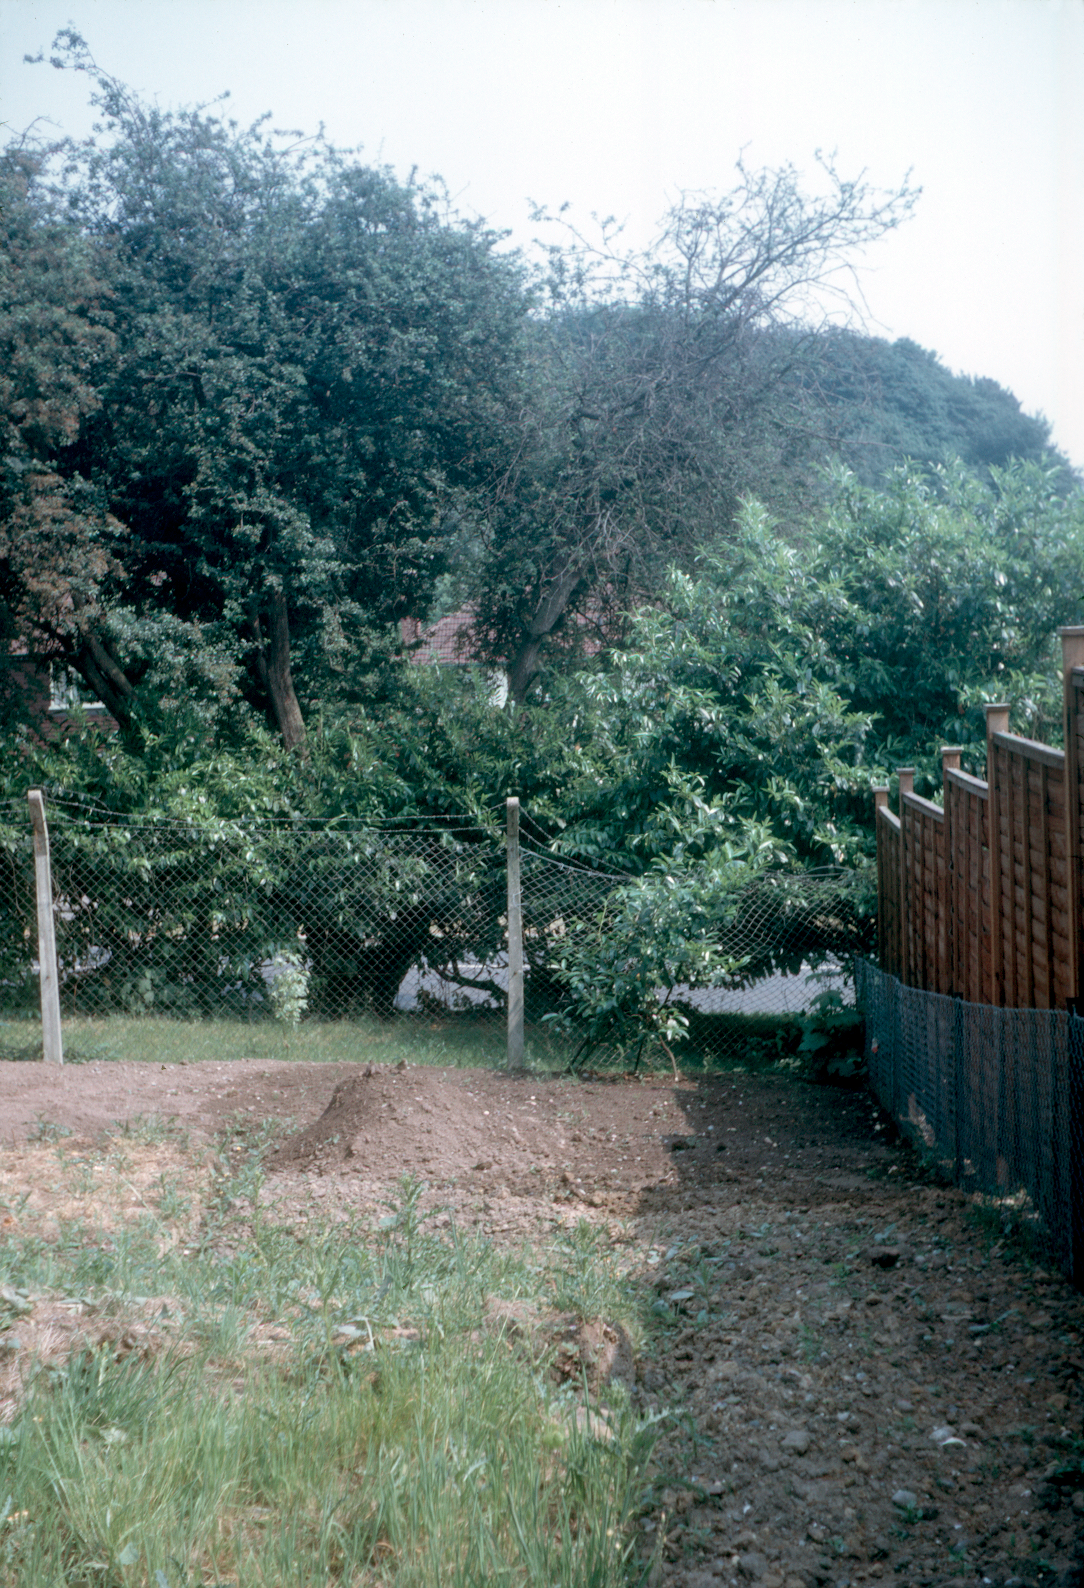 7001929k May 1970 - When our next door neighbours put up a fence, they didn't bother to remove their chain link fencing!